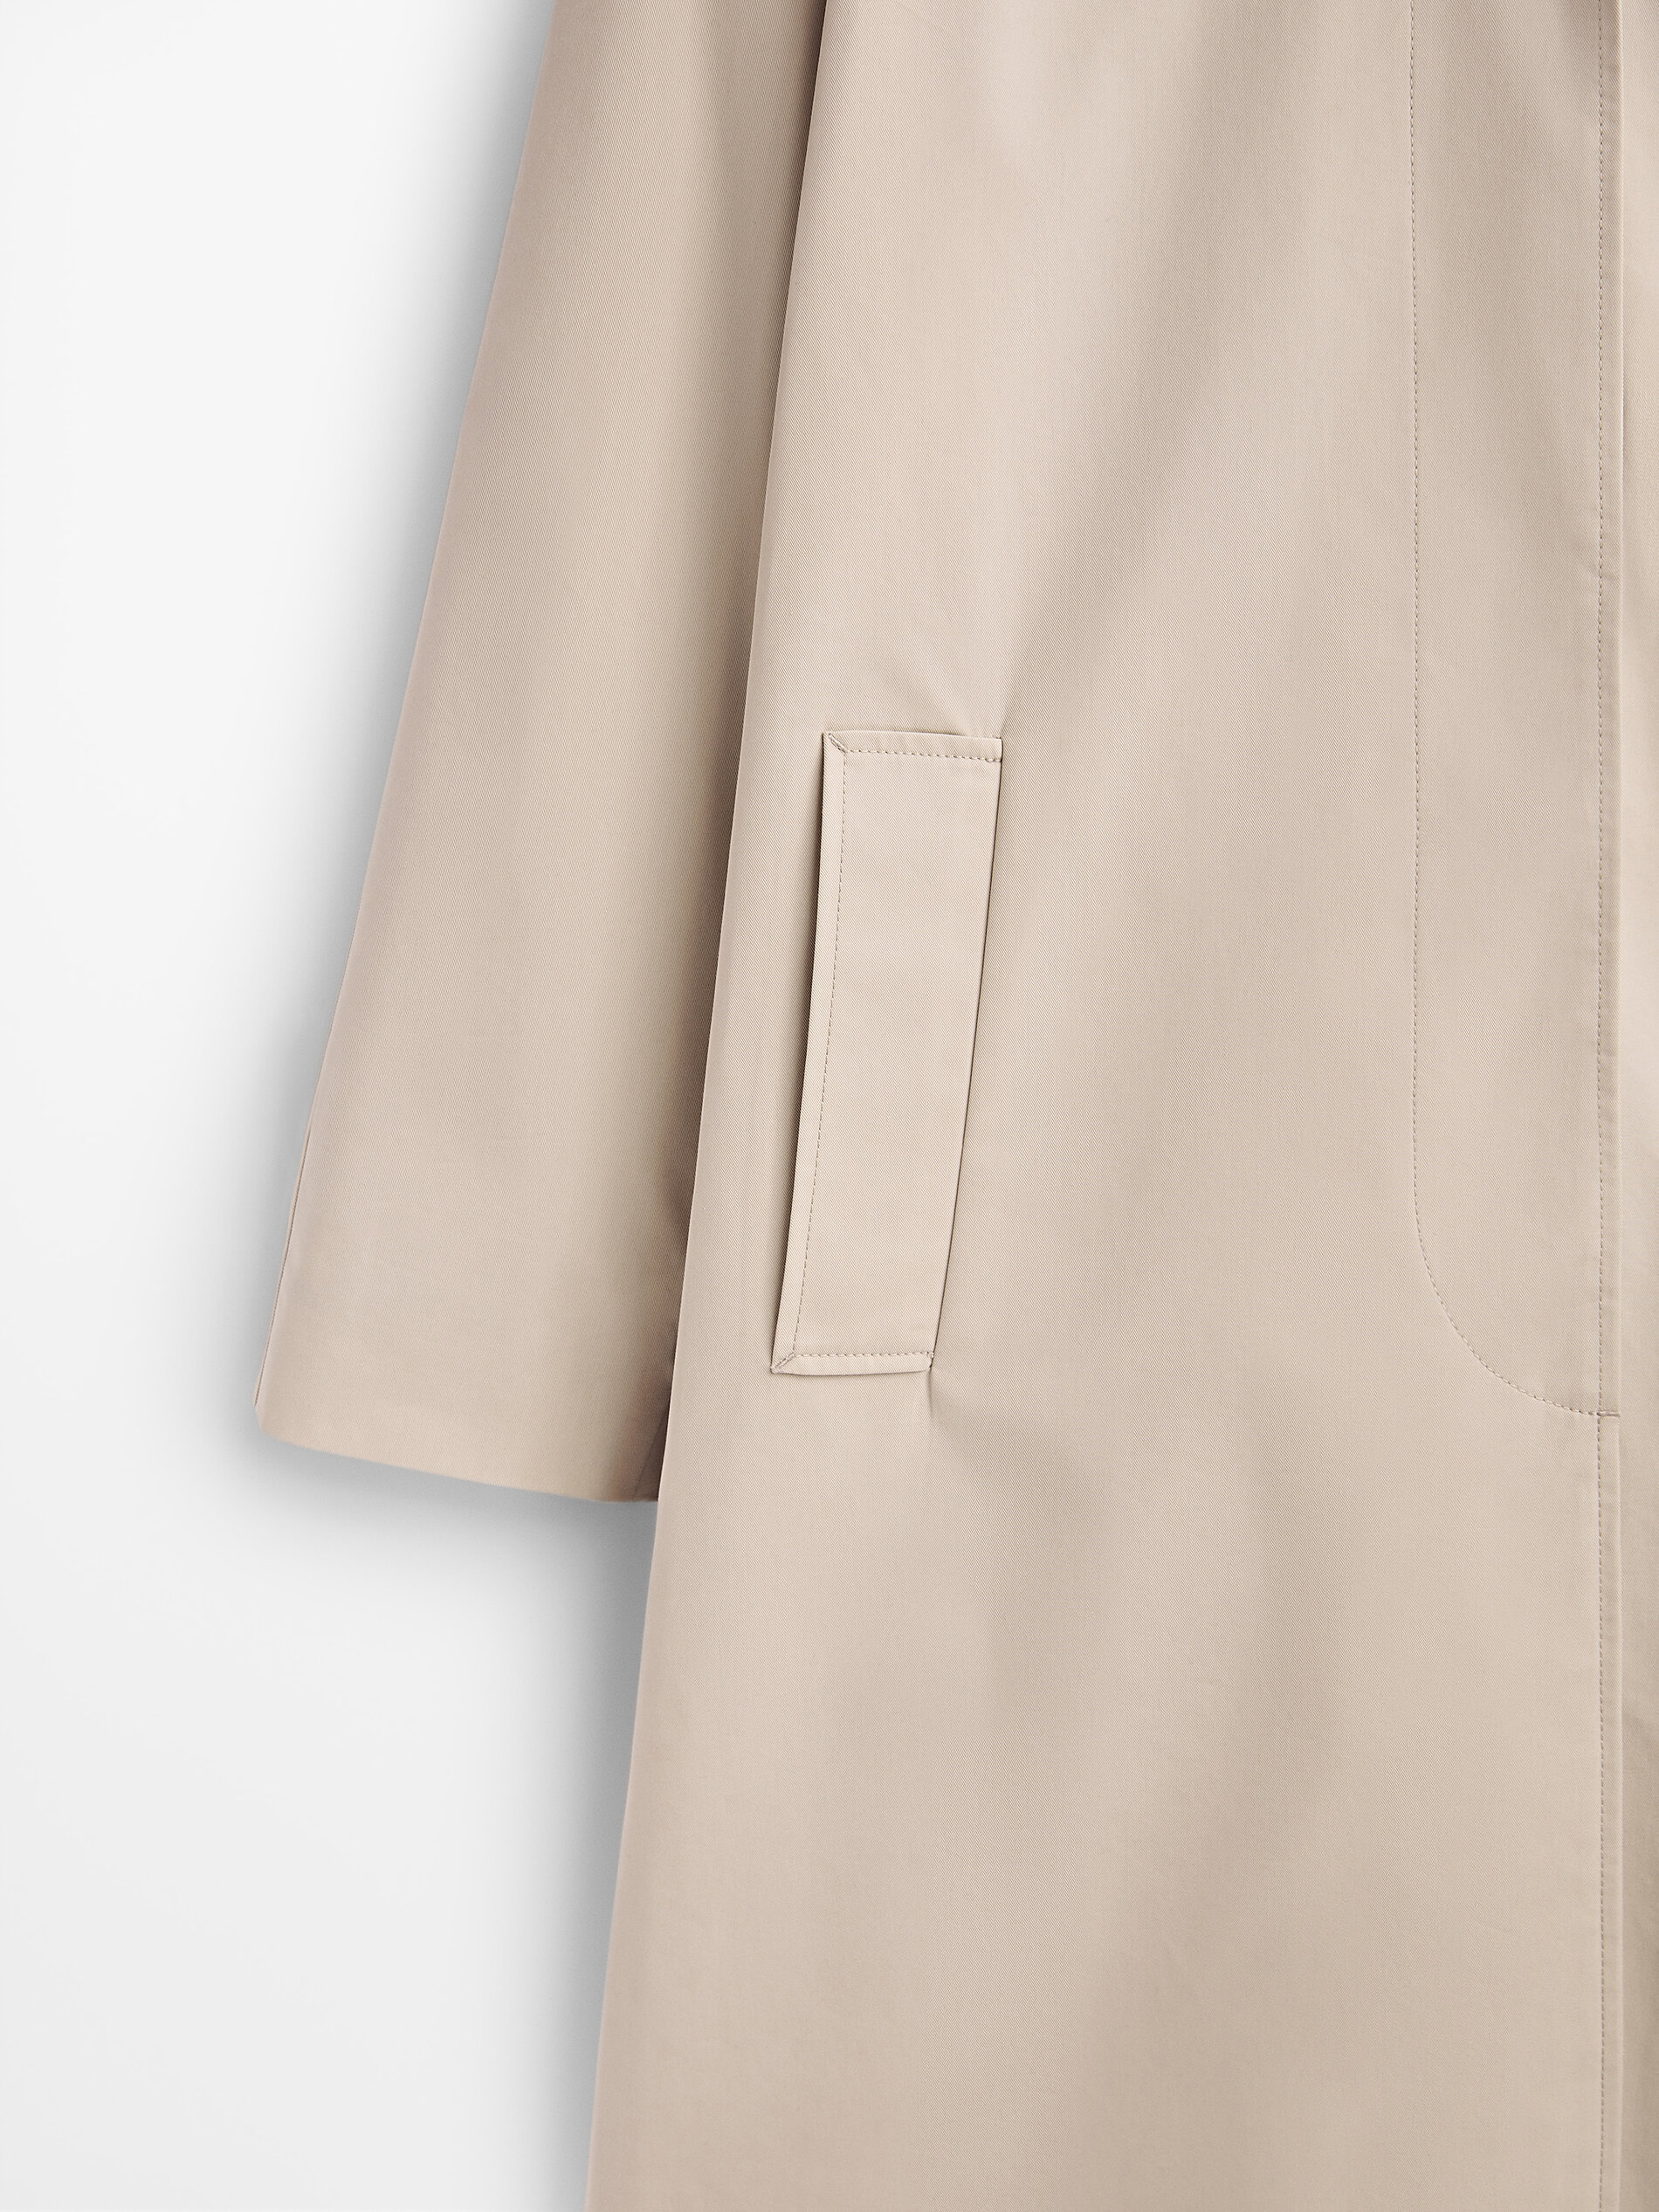 Trench coat with side vents